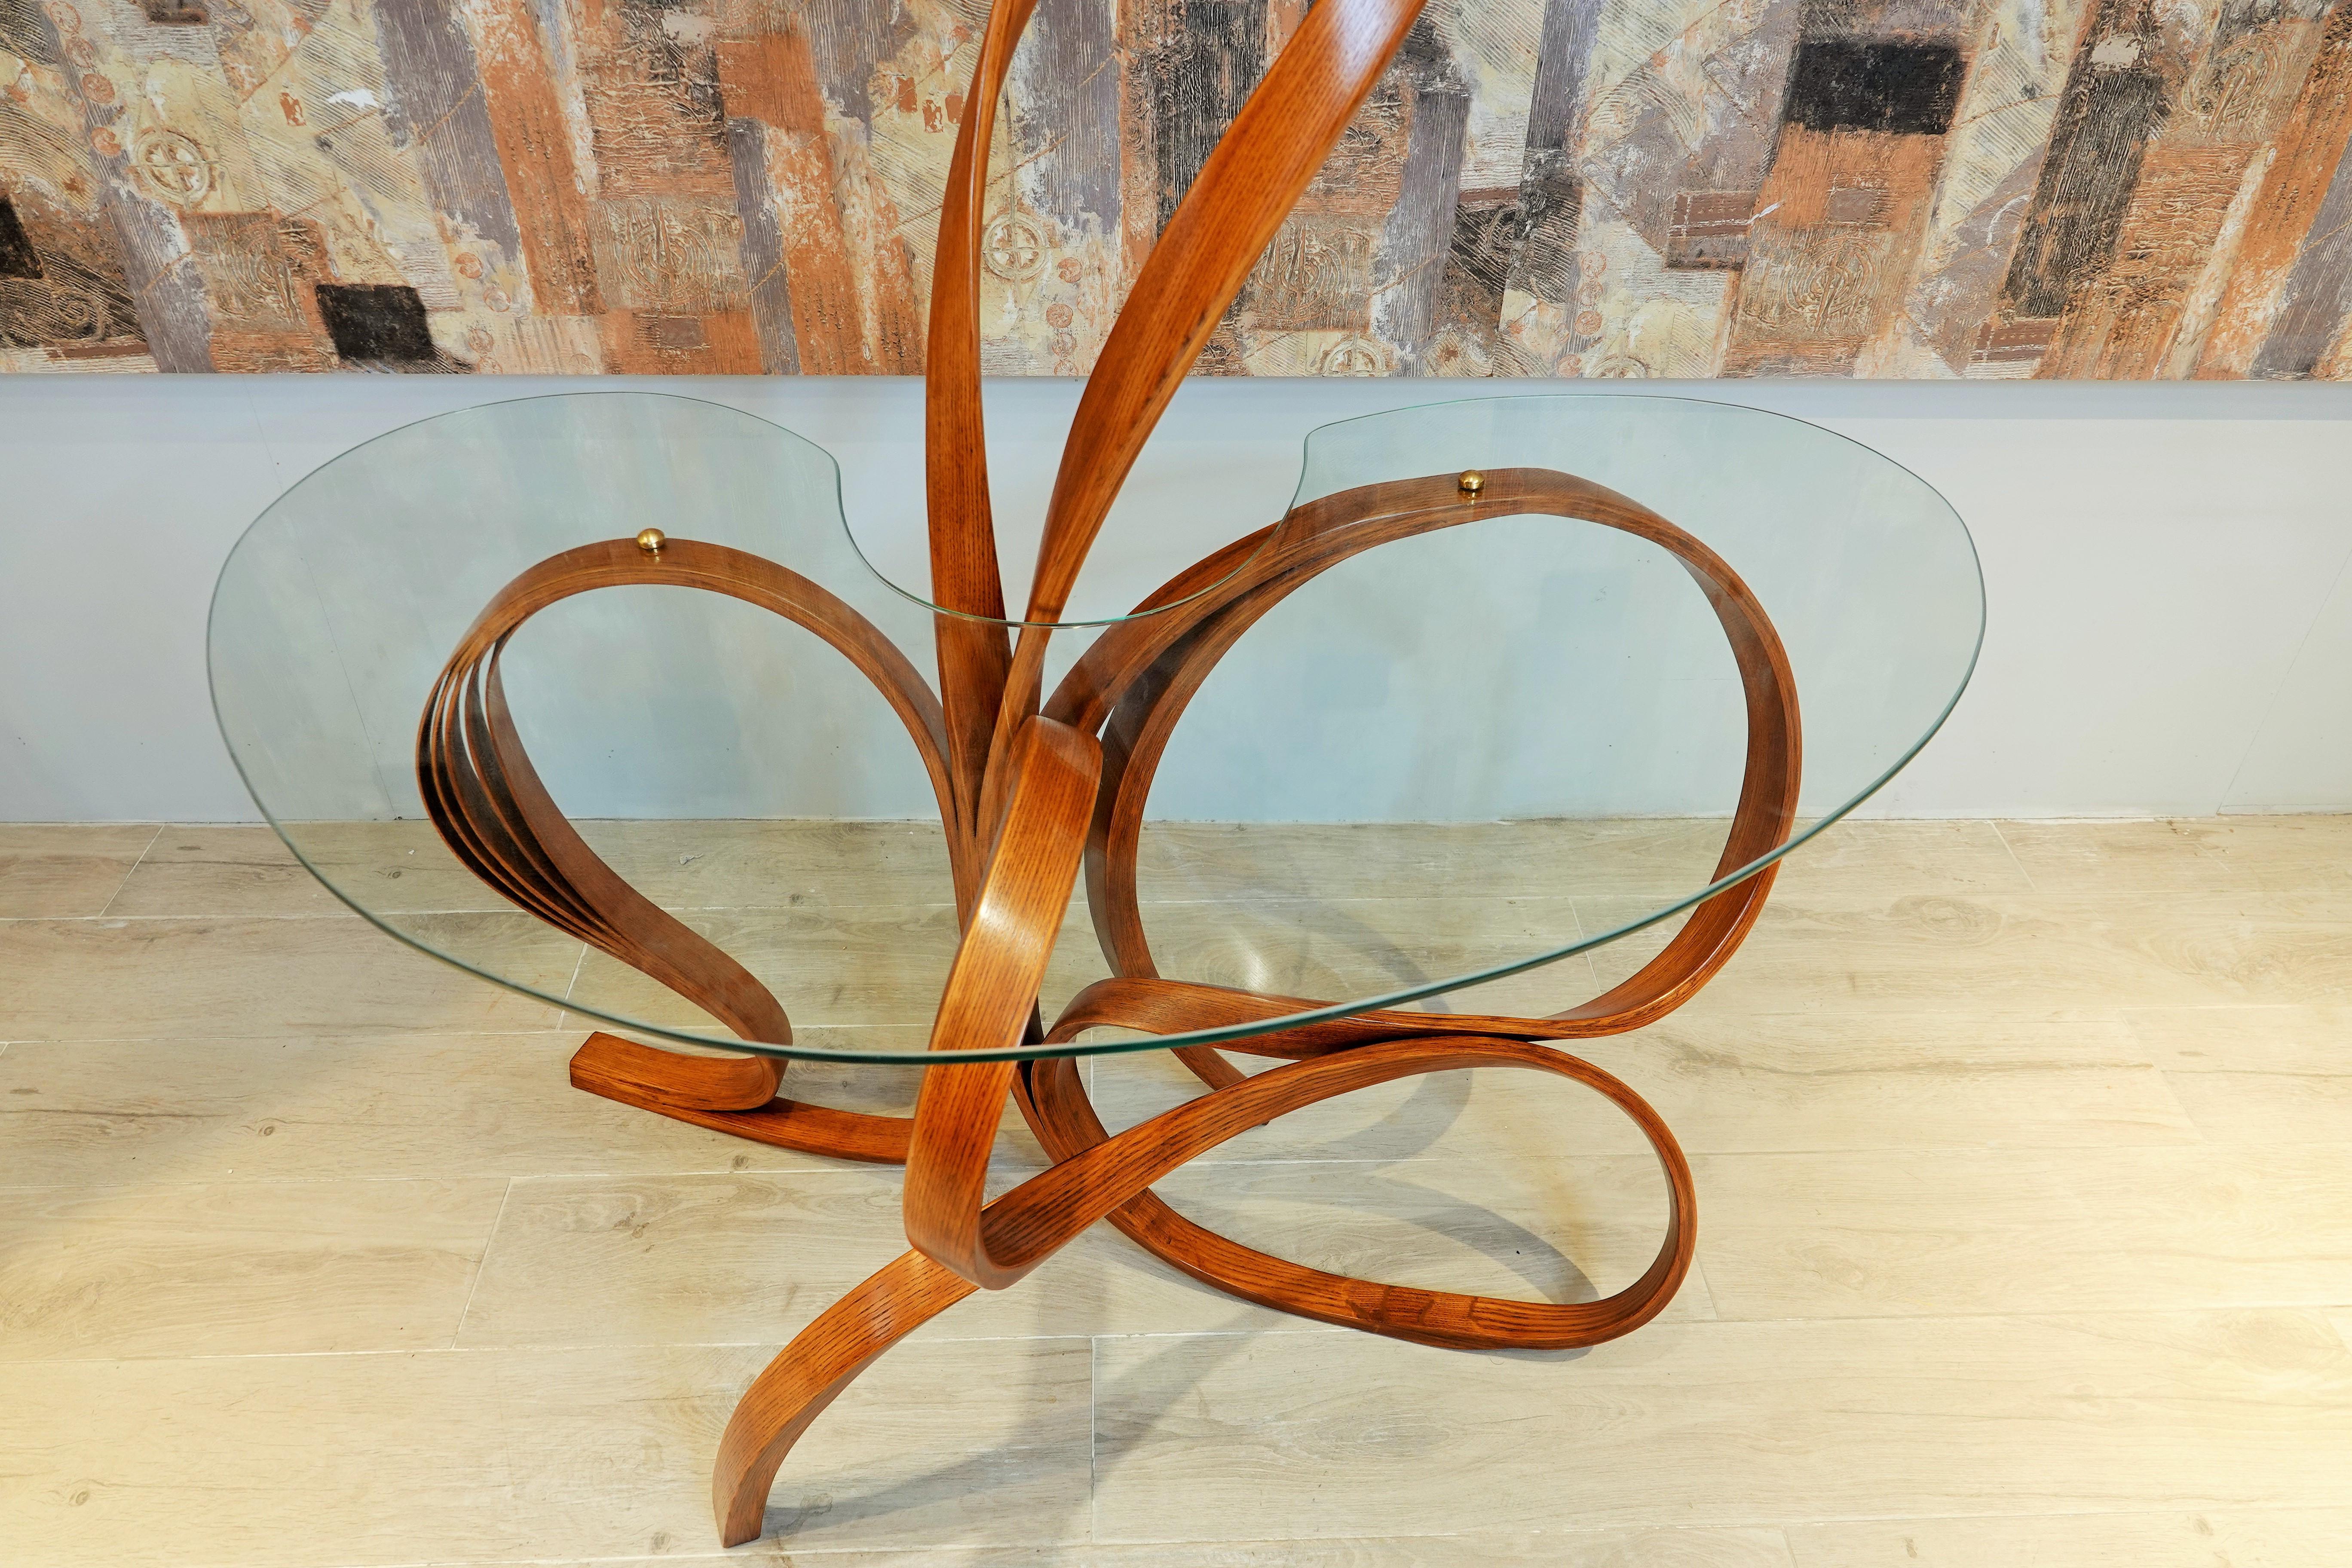 Foyer Table by Raka Studio - Bent Wood with Brass Elements and Safety Glass  In New Condition For Sale In Cape Girardeau, MO